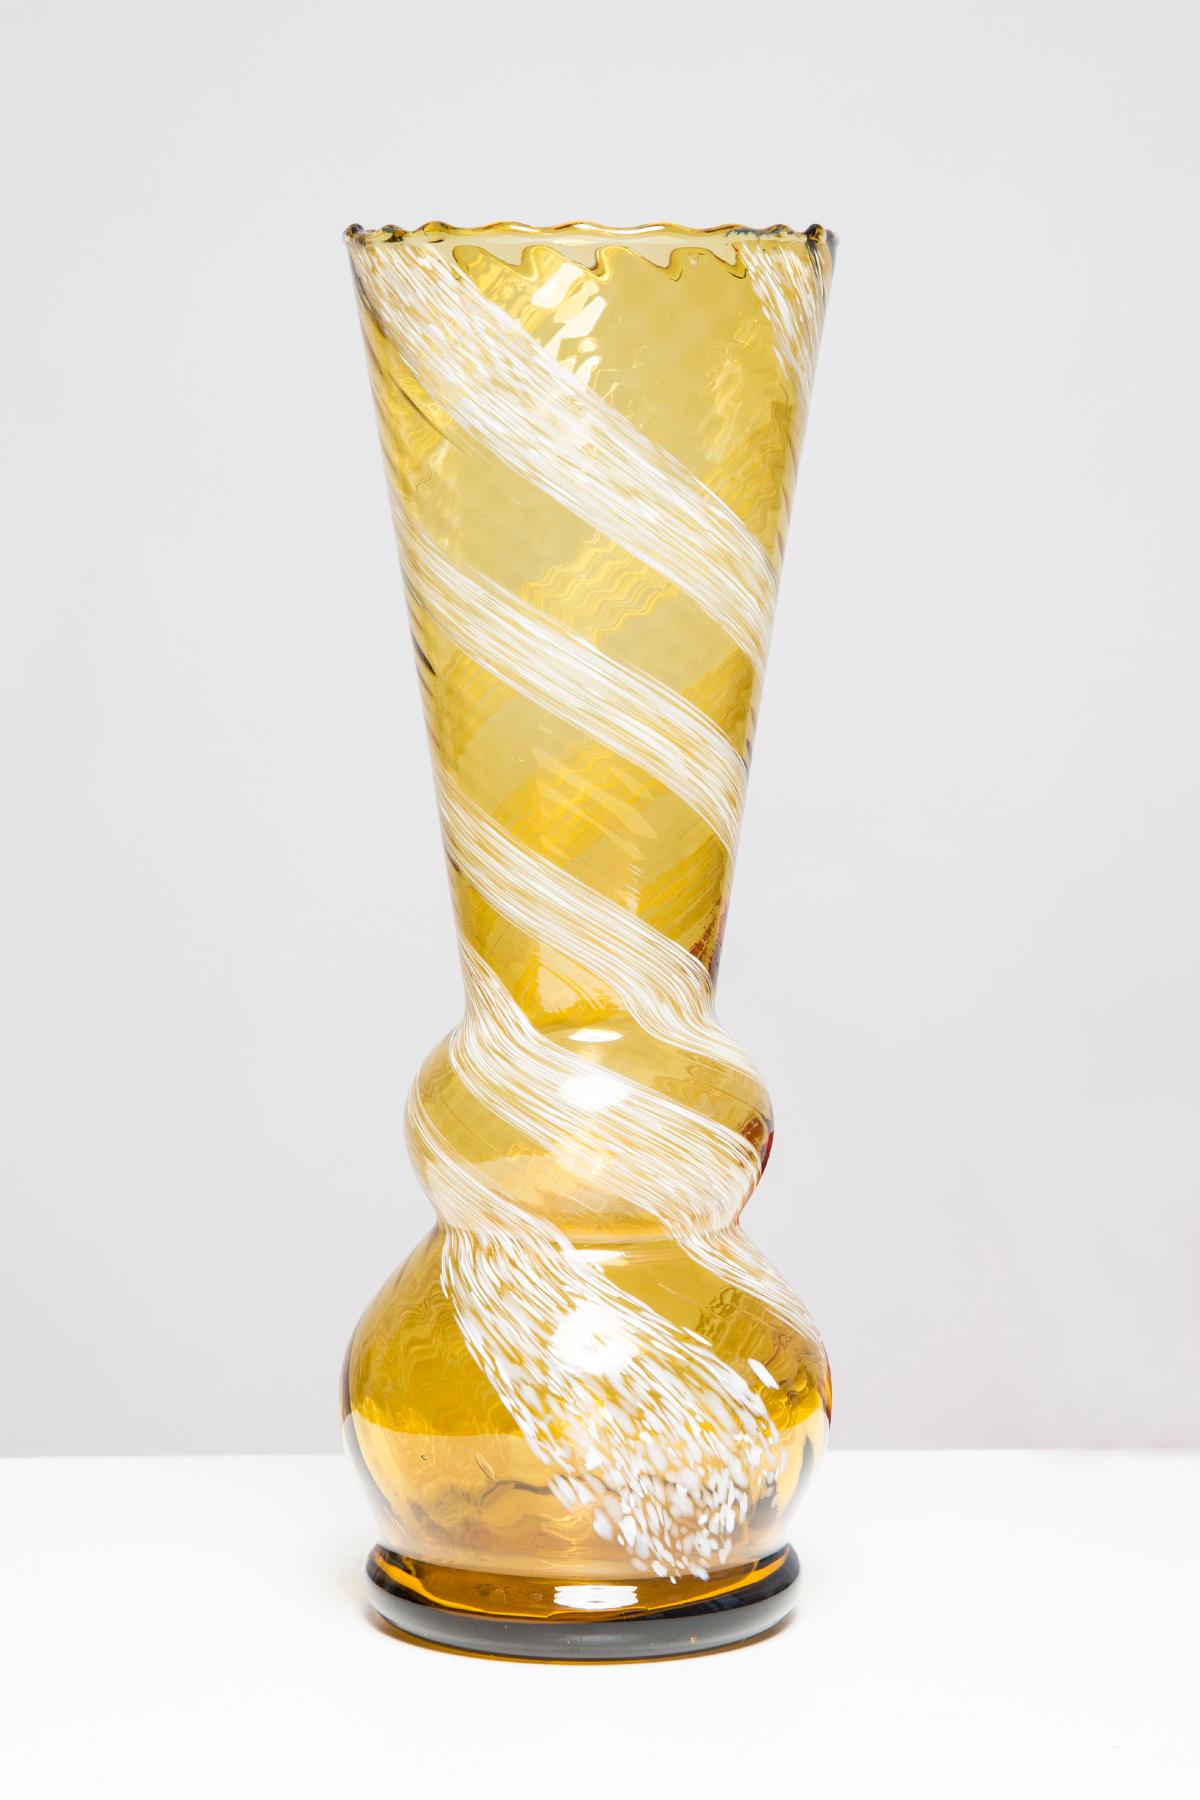 Hand-Carved Mid Century Artistic Glass Yellow Vase, Tarnowiec, Sulczan, Europe, 1970s For Sale